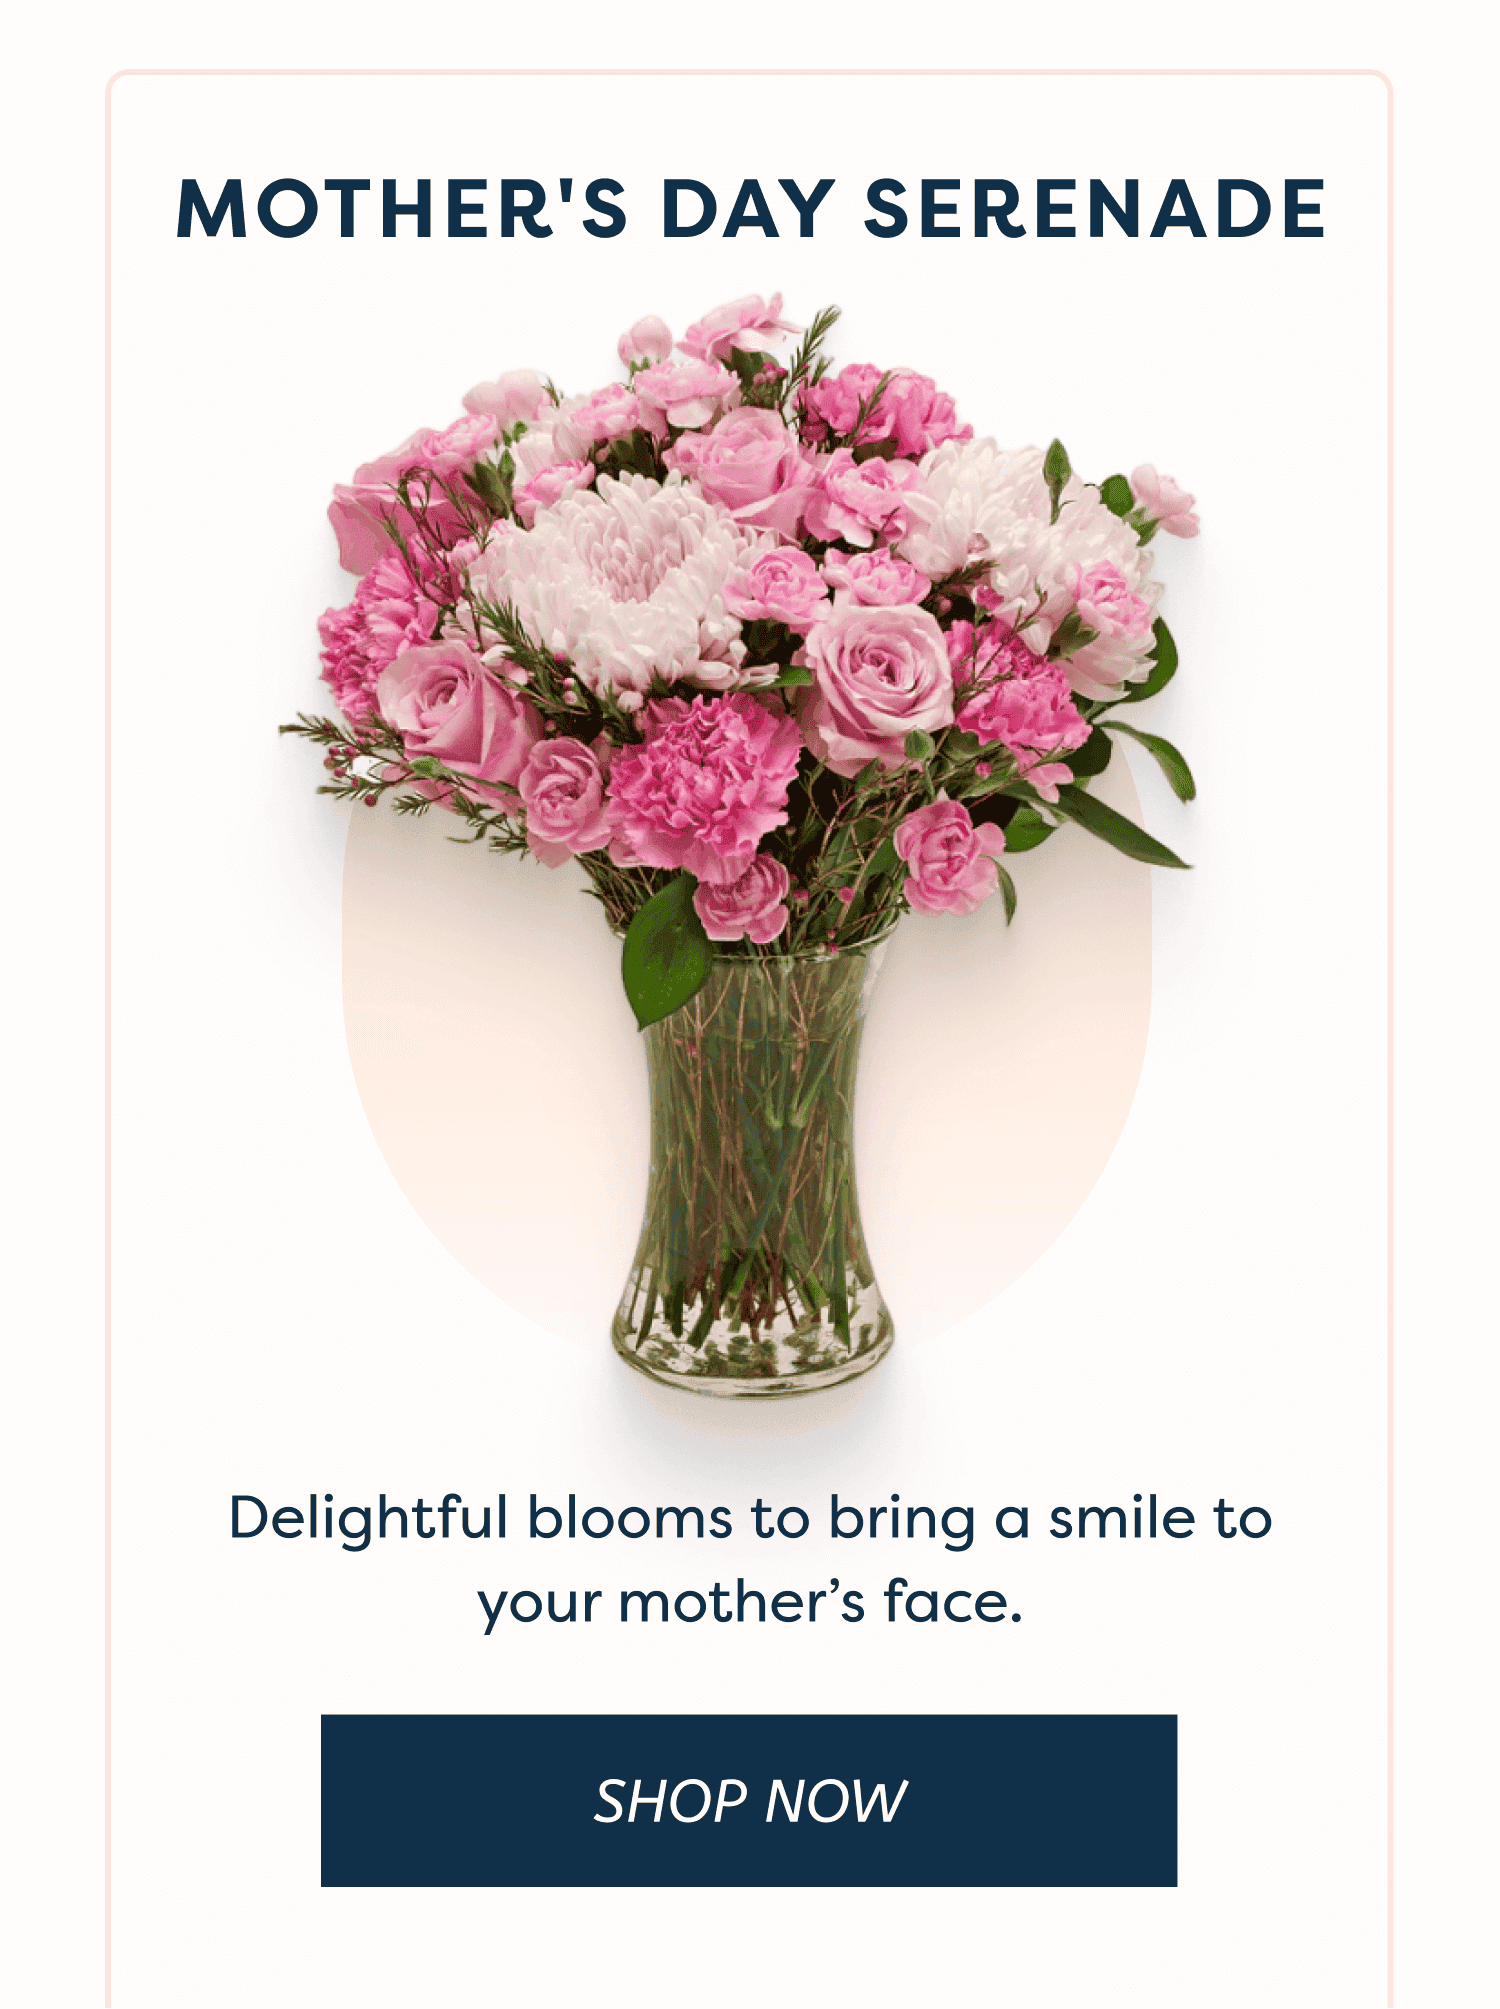 Mother's Day Serenade Delightful blooms to bring a smile to your mother’s face. SHOP NOW